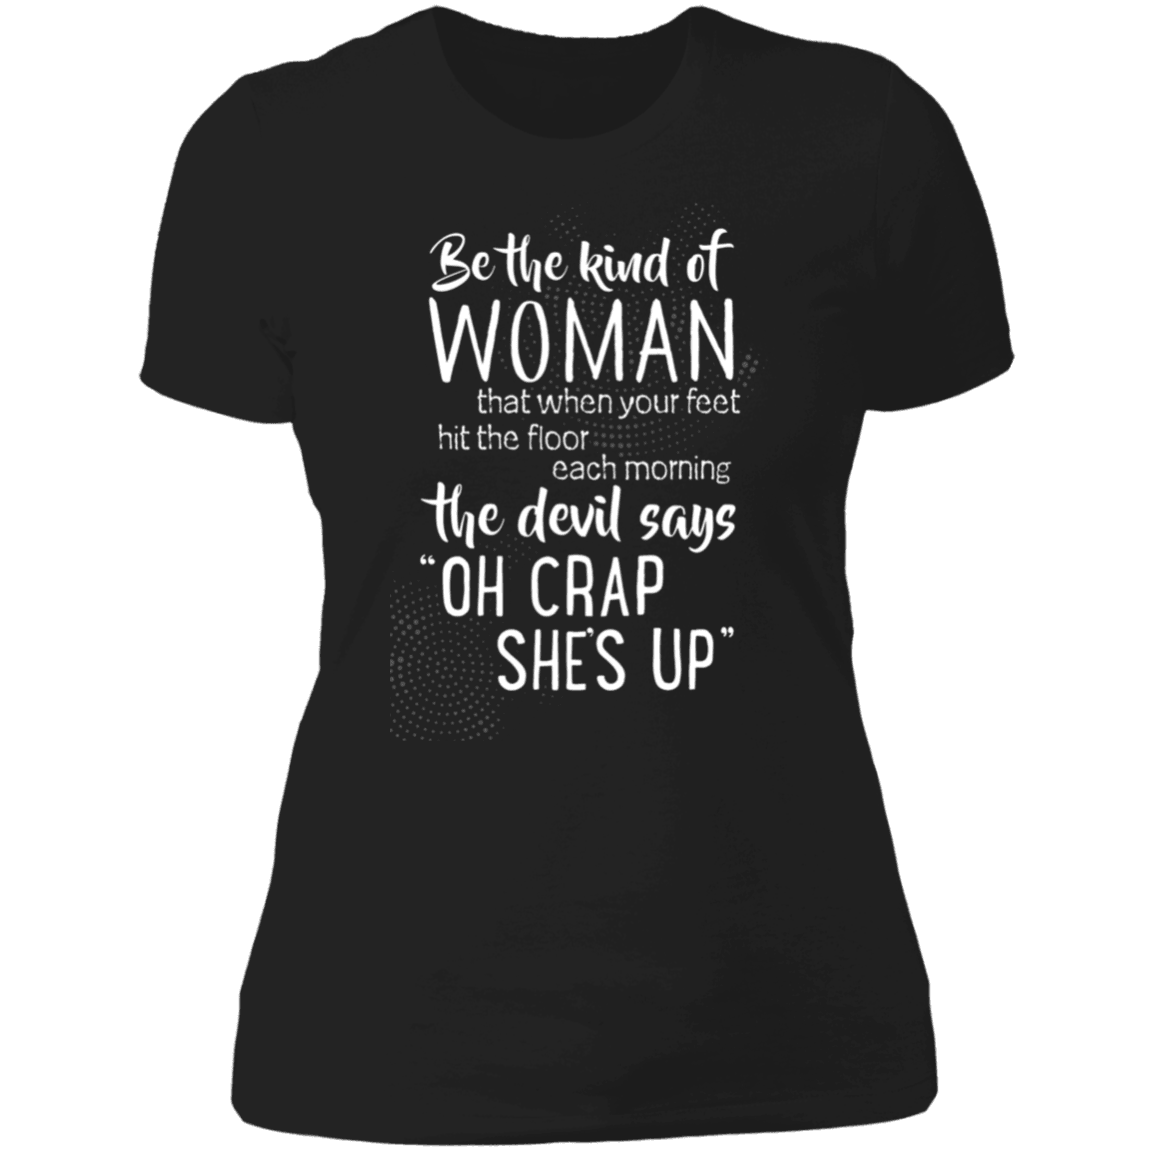 Designs by MyUtopia Shout Out:Be The Kind of Woman That Scares The Devil Ladies' Boyfriend T-Shirt,Black / X-Small,Ladies T-Shirts